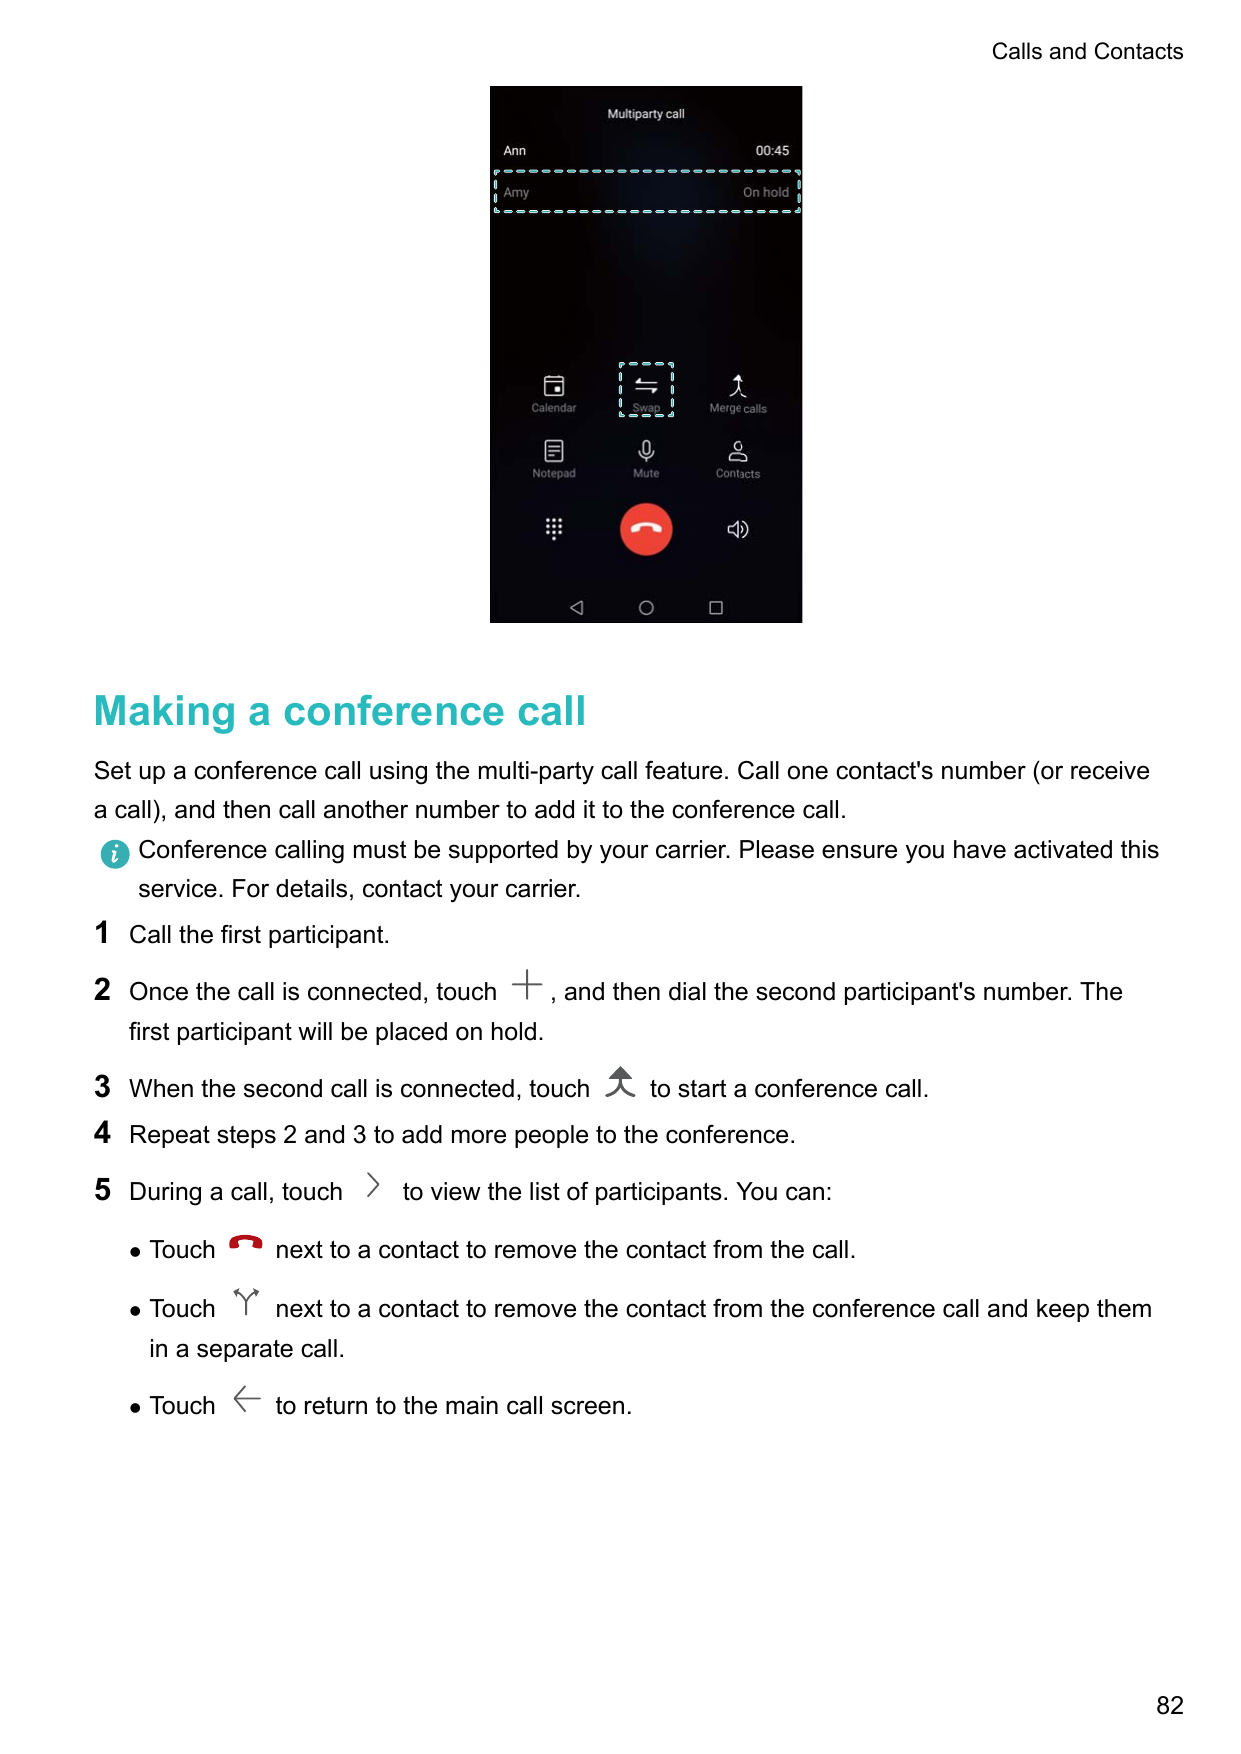 Calls and ContactsMaking a conference callSet up a conference call using the multi-party call feature. Call one contact's number